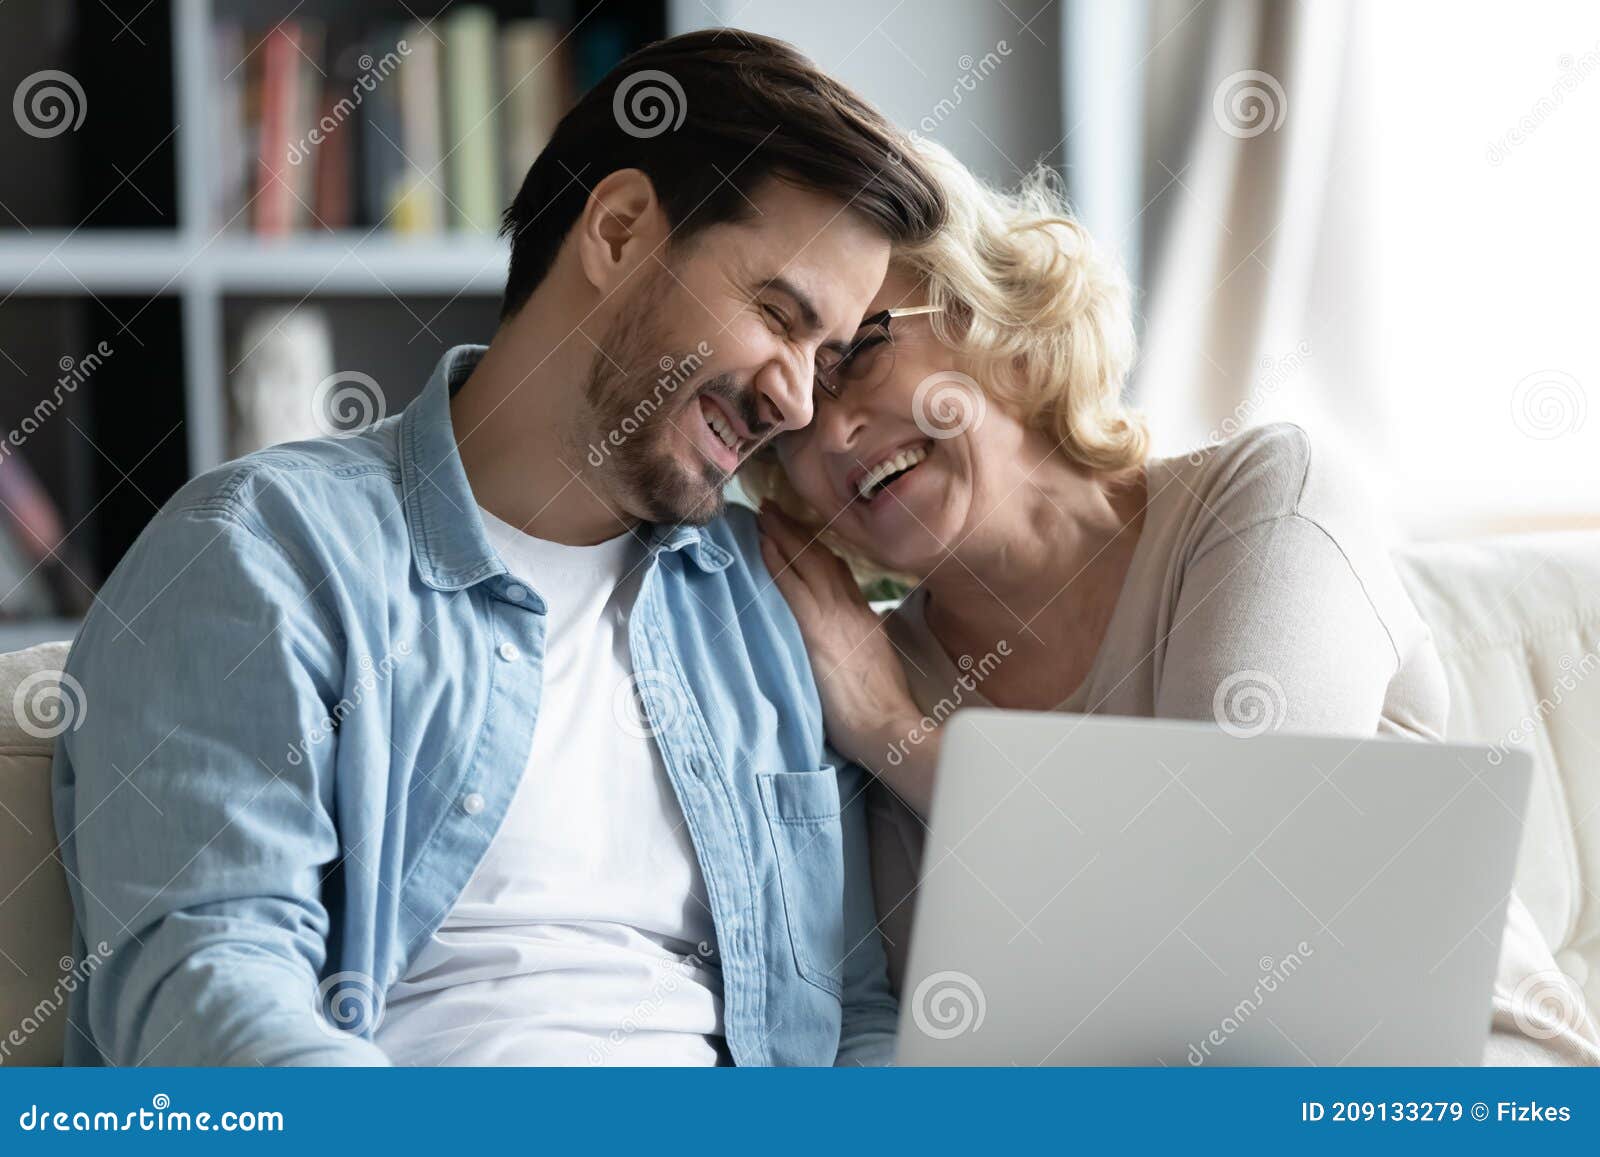 Bonding Happy Two Generations Family Laughing, Watching Funny Video Online.  Stock Image - Image of care, laugh: 209133279